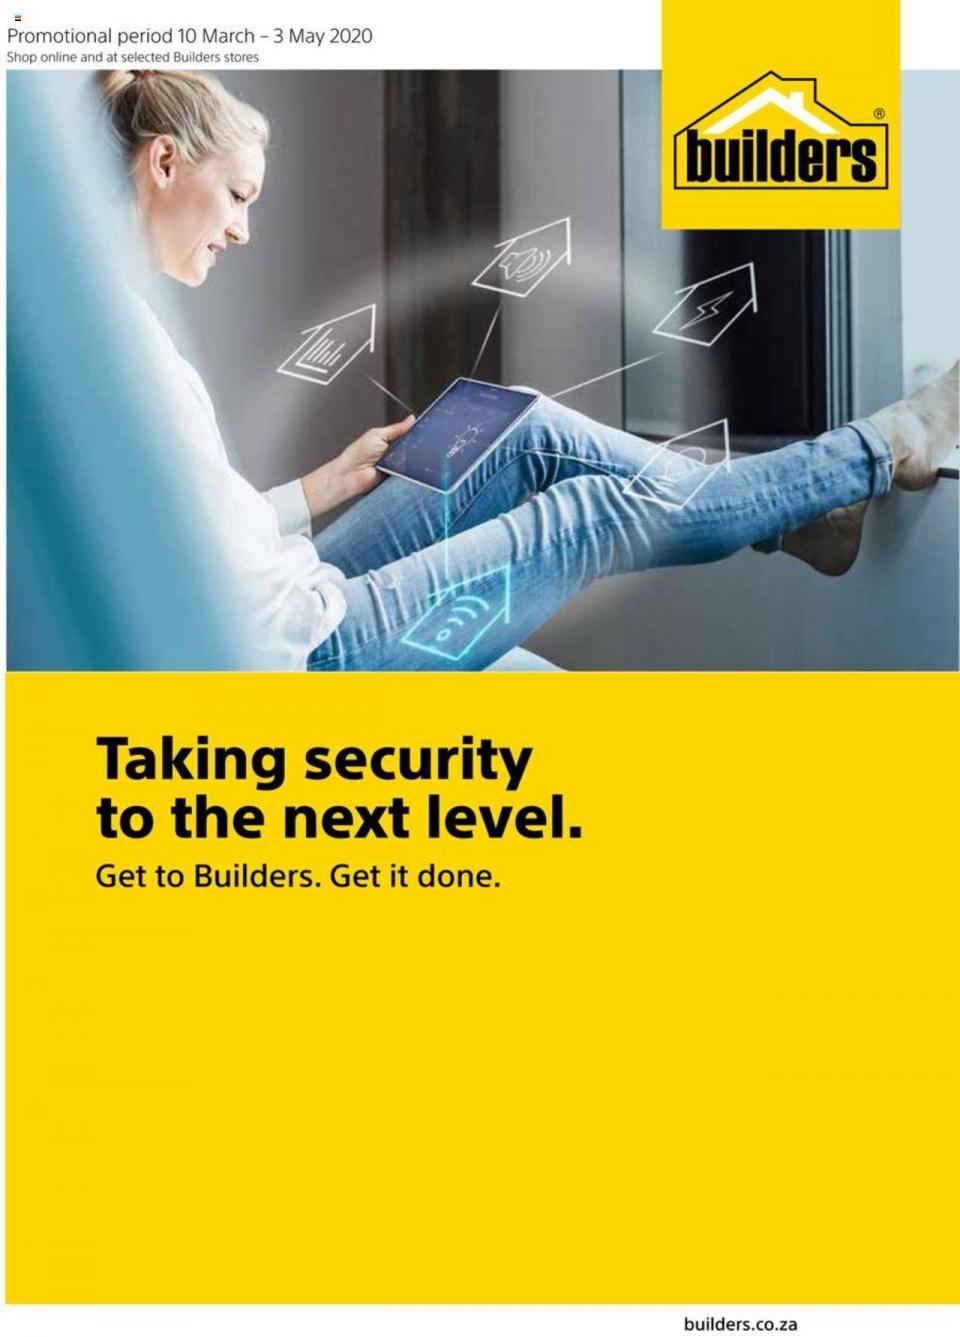 Builders Warehouse Specials Taking Security To The Next Level 10 March 2020